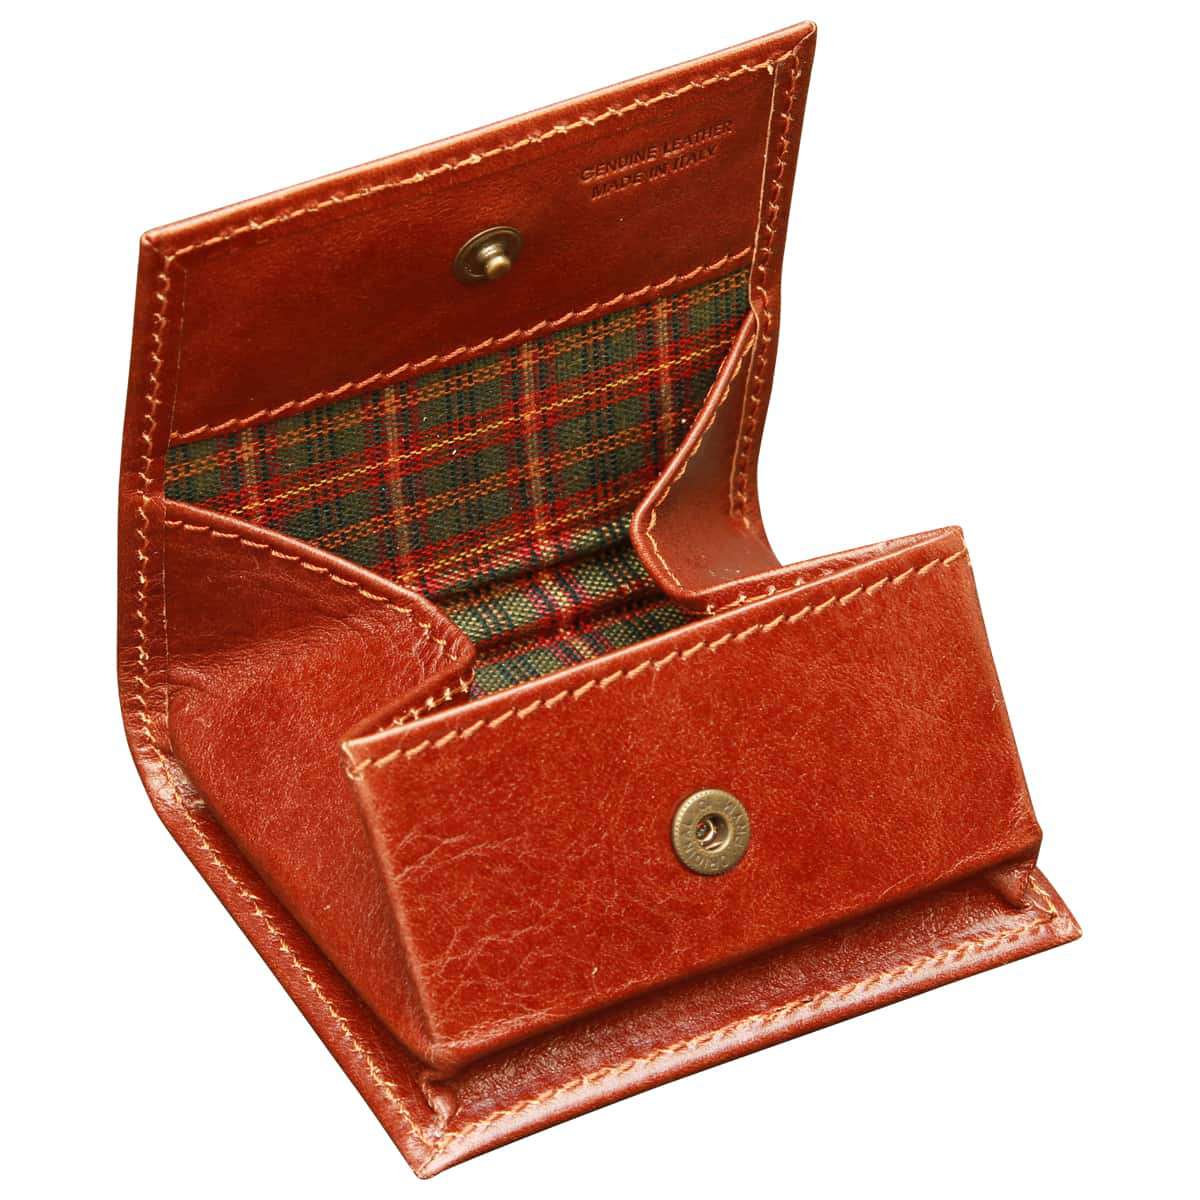 Leather Coin Purse - Brown | 806605MA | EURO | Old Angler Firenze